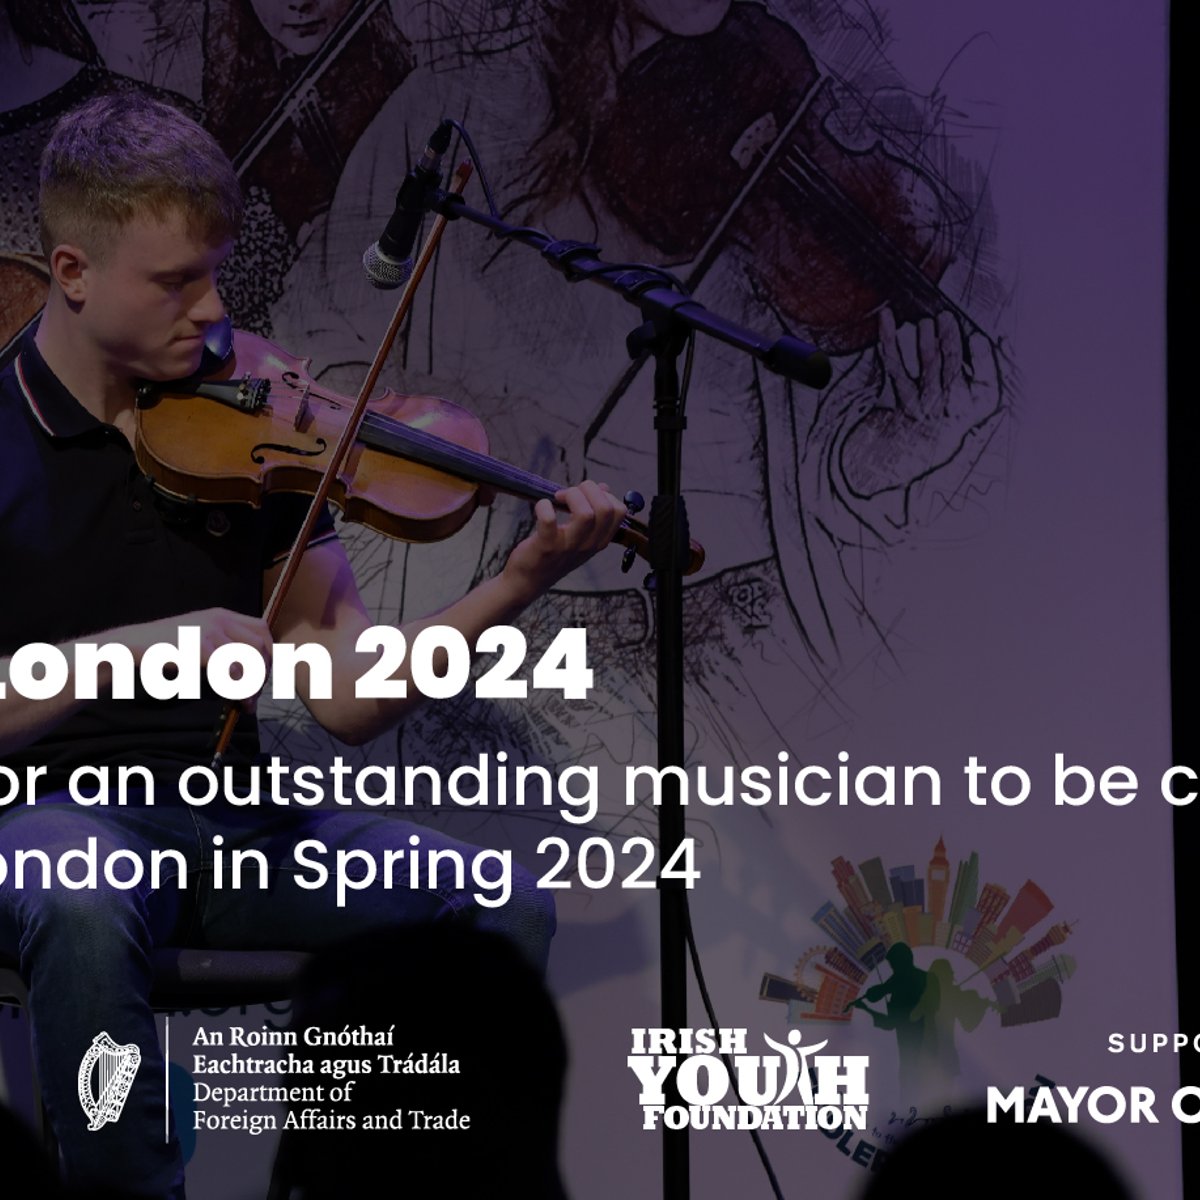 "Are you the Fiddler of London 2024?" organised by Fiddler of London